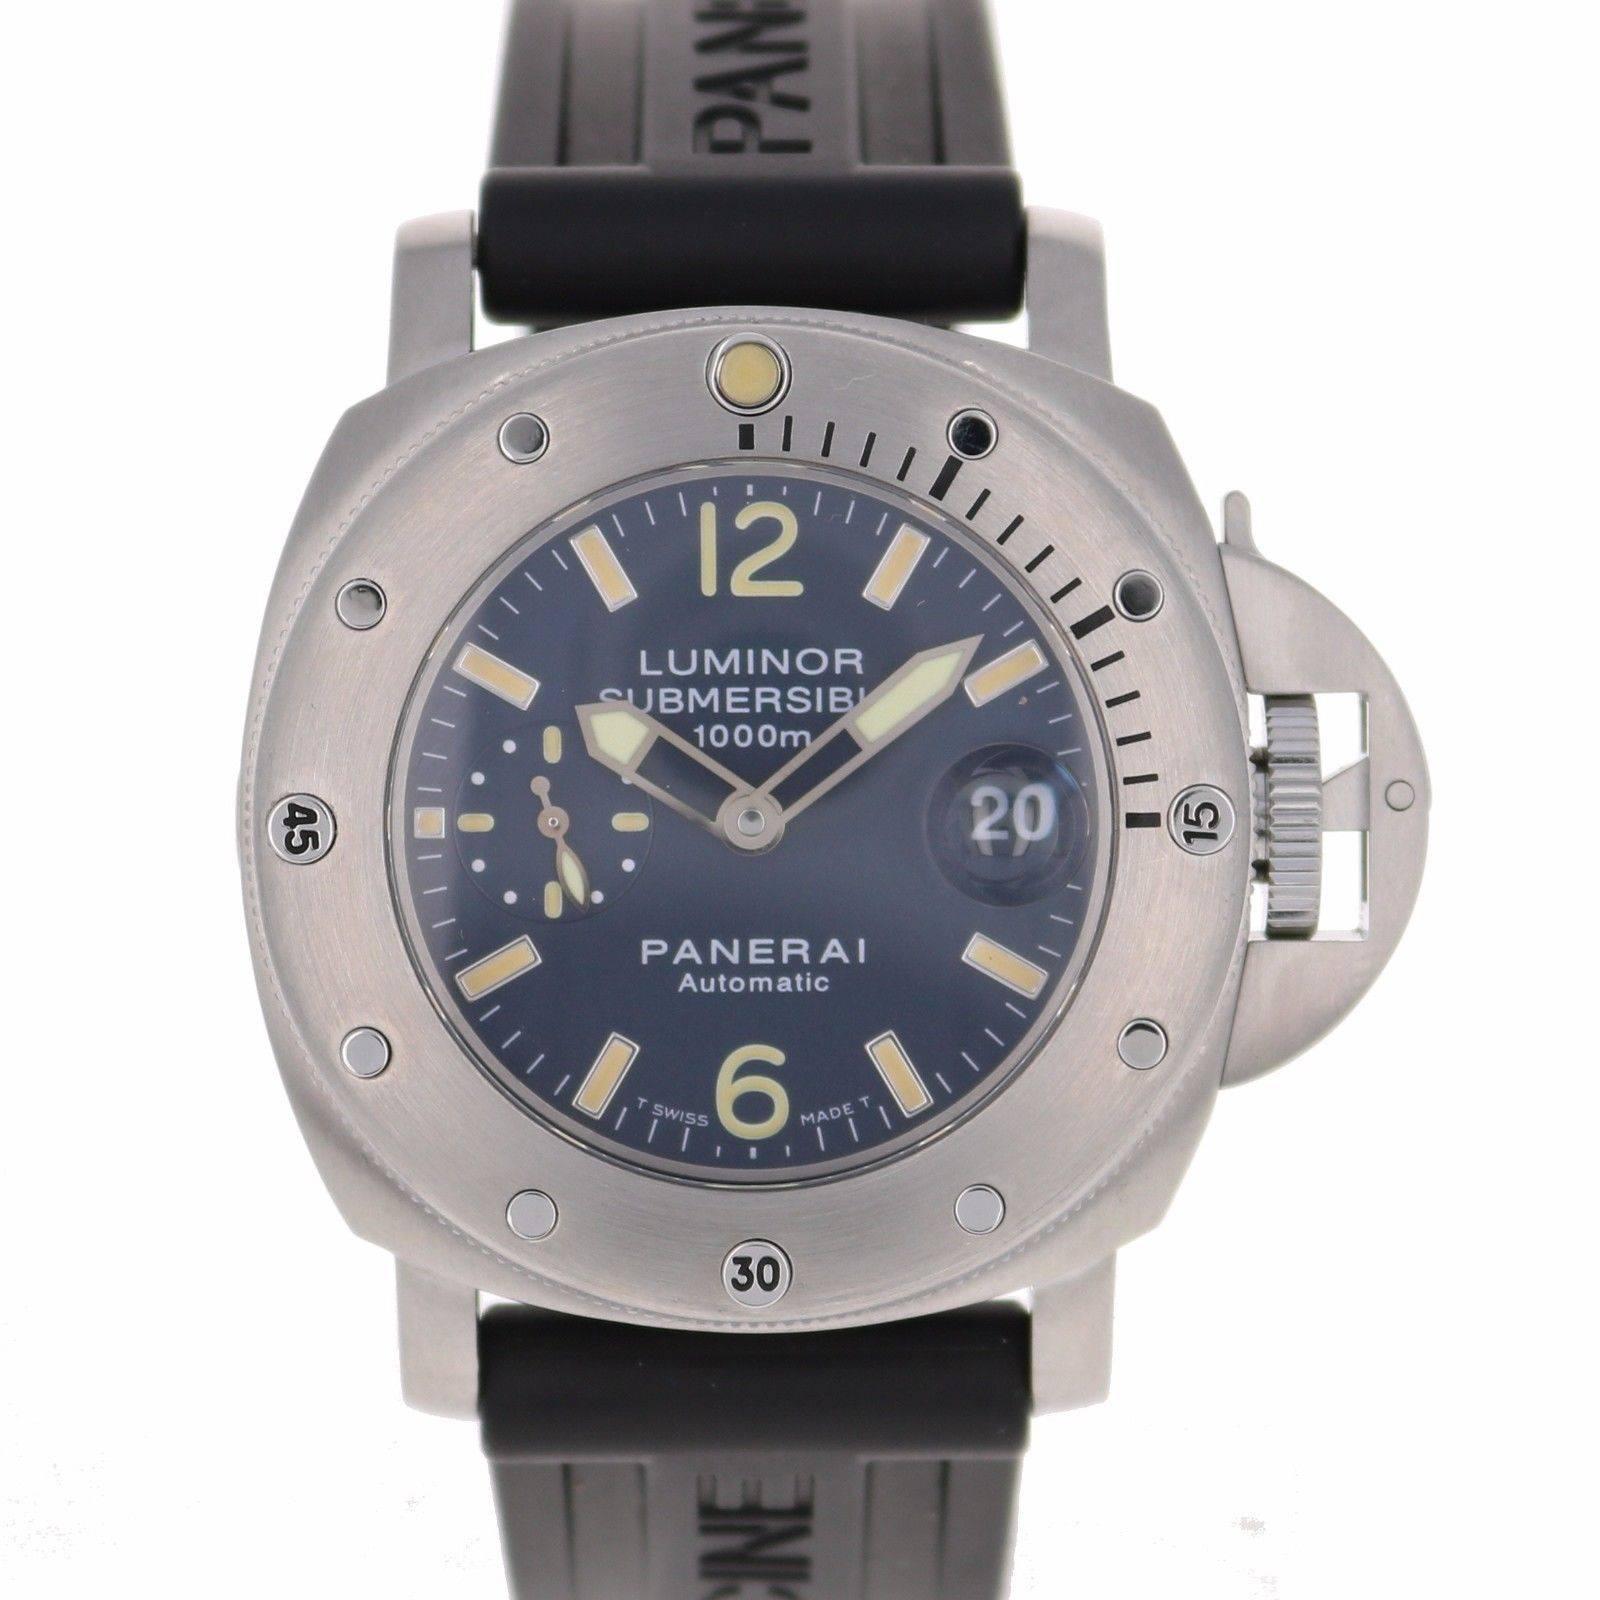 Brand Name  Panerai 
Style Number  PAM 87 
Also Called  PAM00087 
Series  Luminor Submersible 1000m 
Gender  Men's 
Case Material  Stainless Steel 
Dial Color  Blue 
Movement  Automatic 
Engine  Cal. OP III 
Functions  Hours, Minutes, Seconds, Date